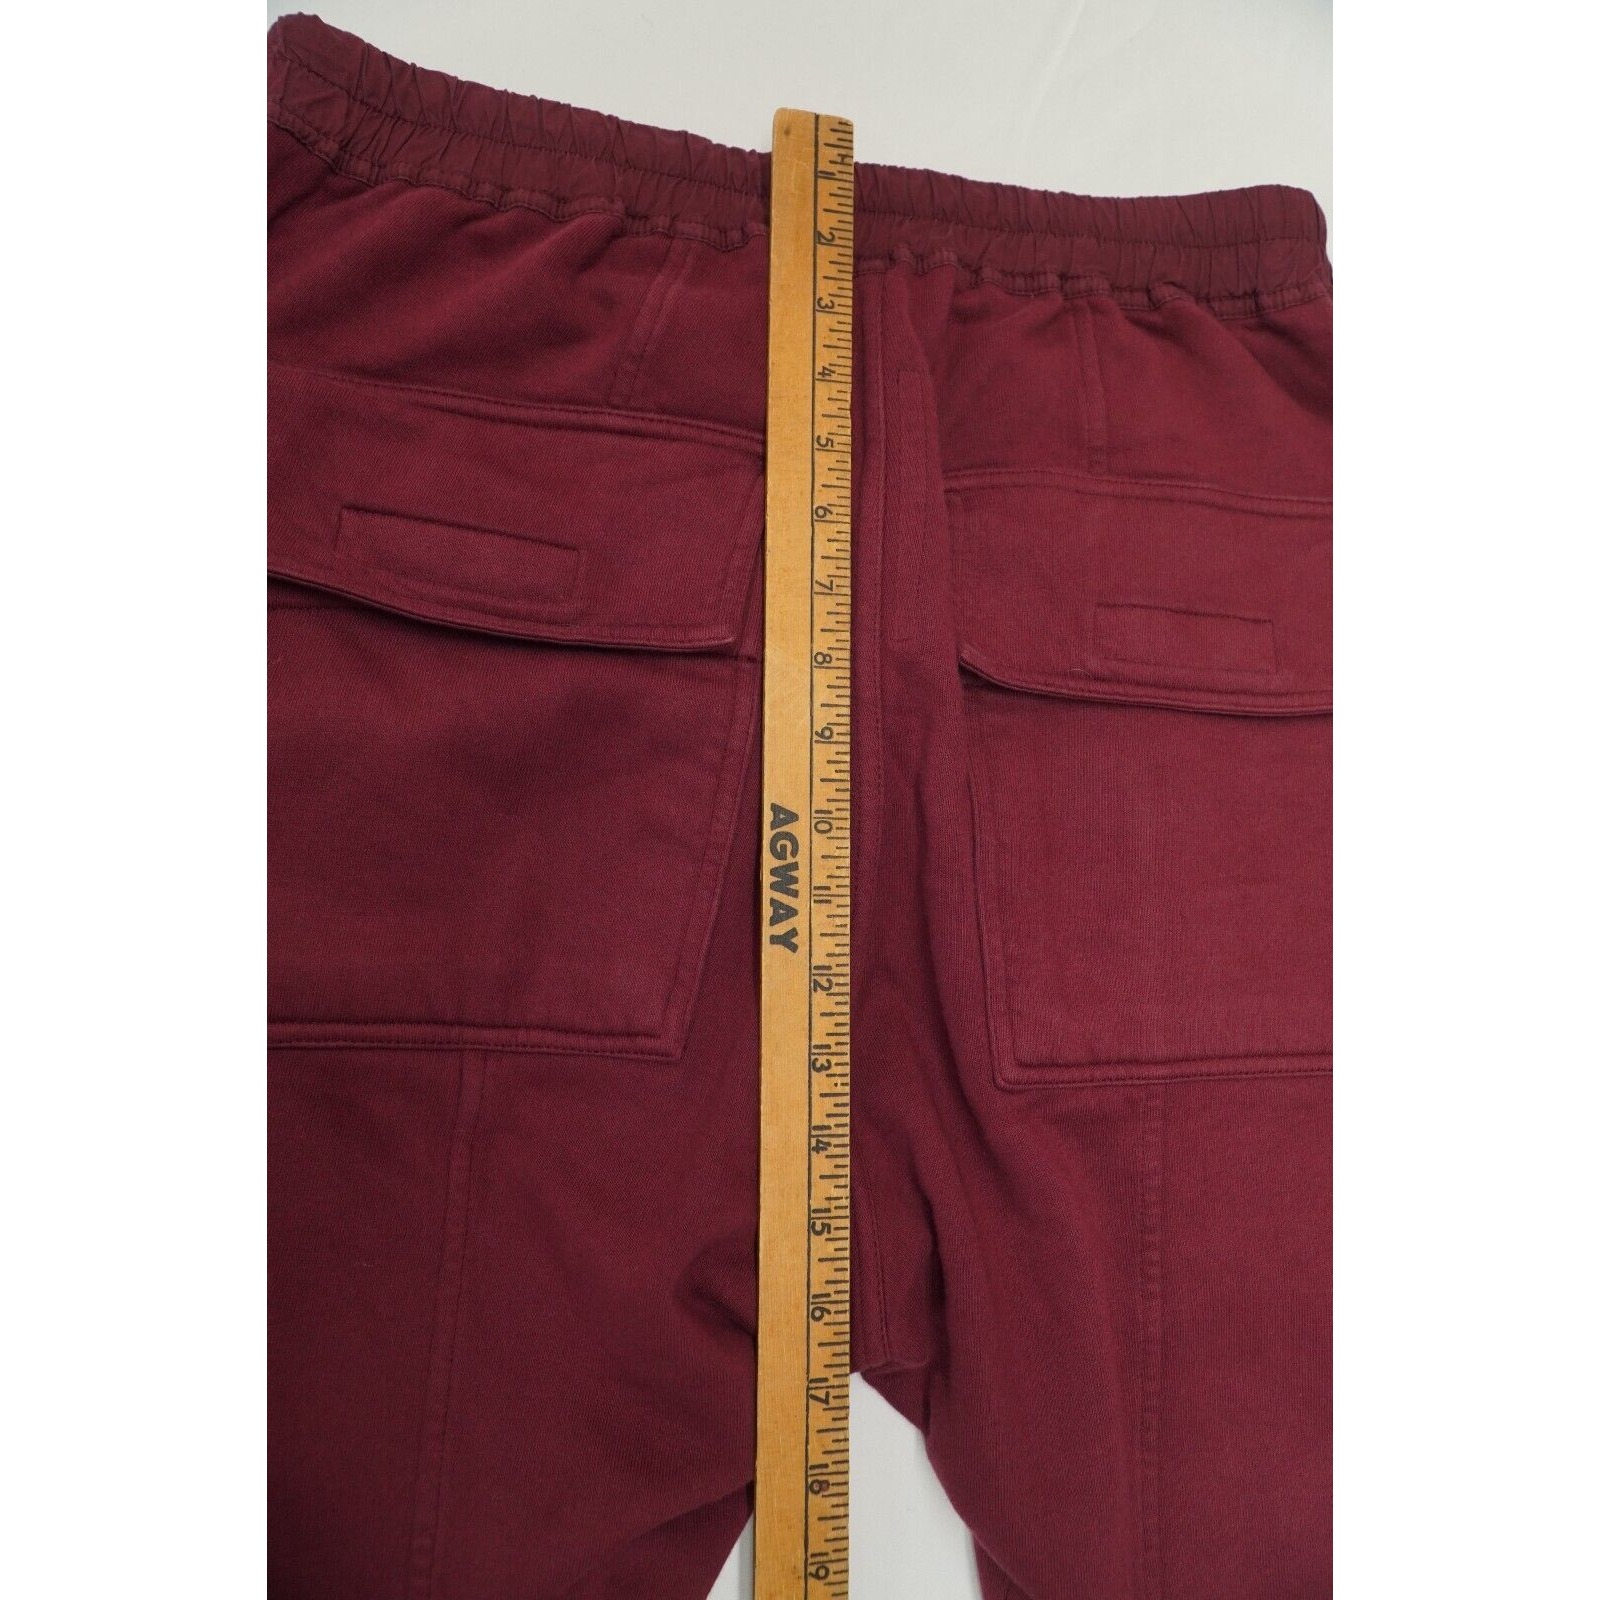 Rick Creatch Cargo Cropped Sweatpant Bruise Red FW20 - 16